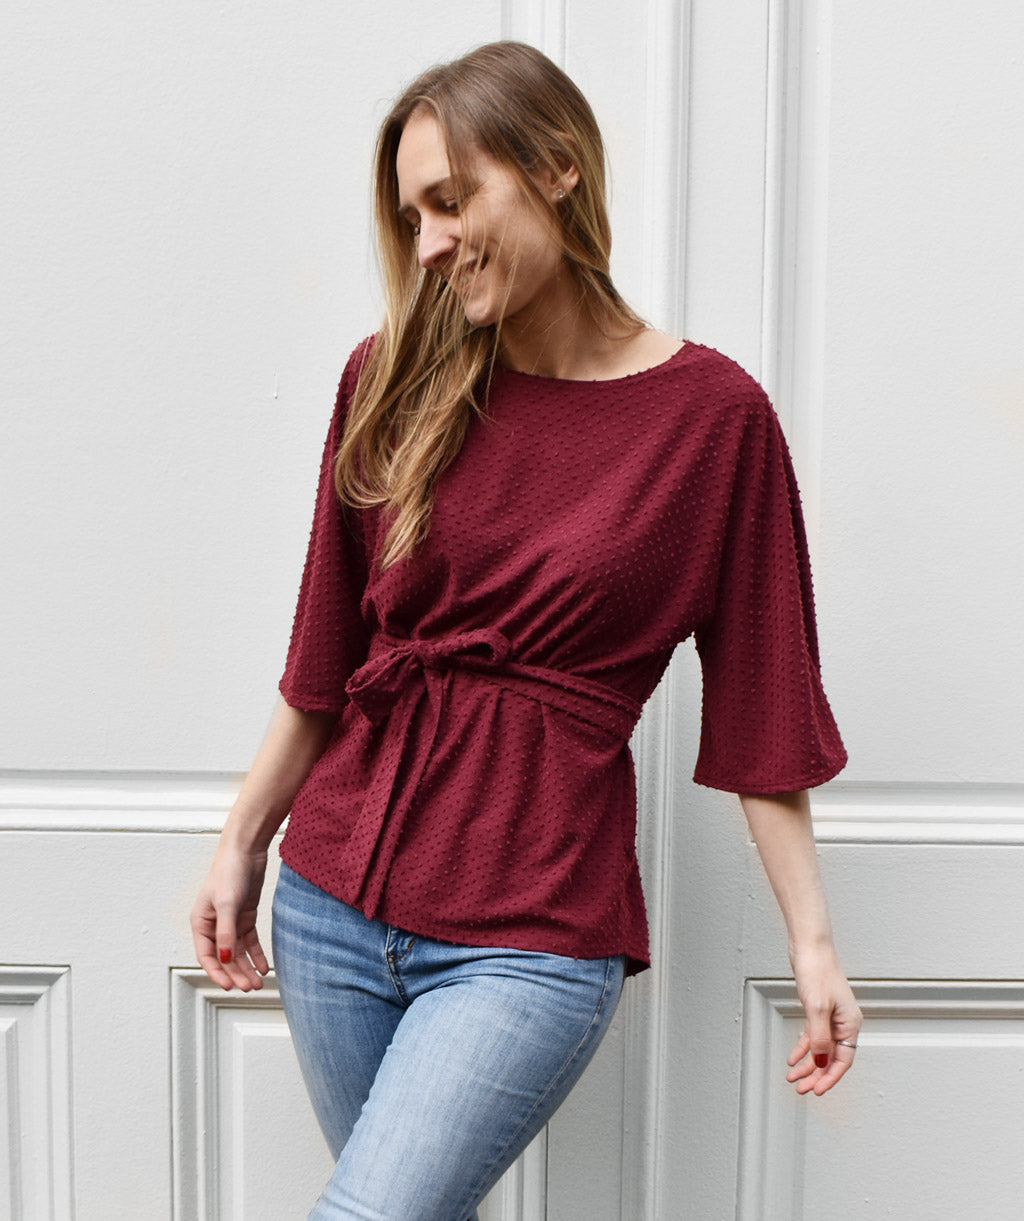 MICHELLE dotted swiss top in Burgundy